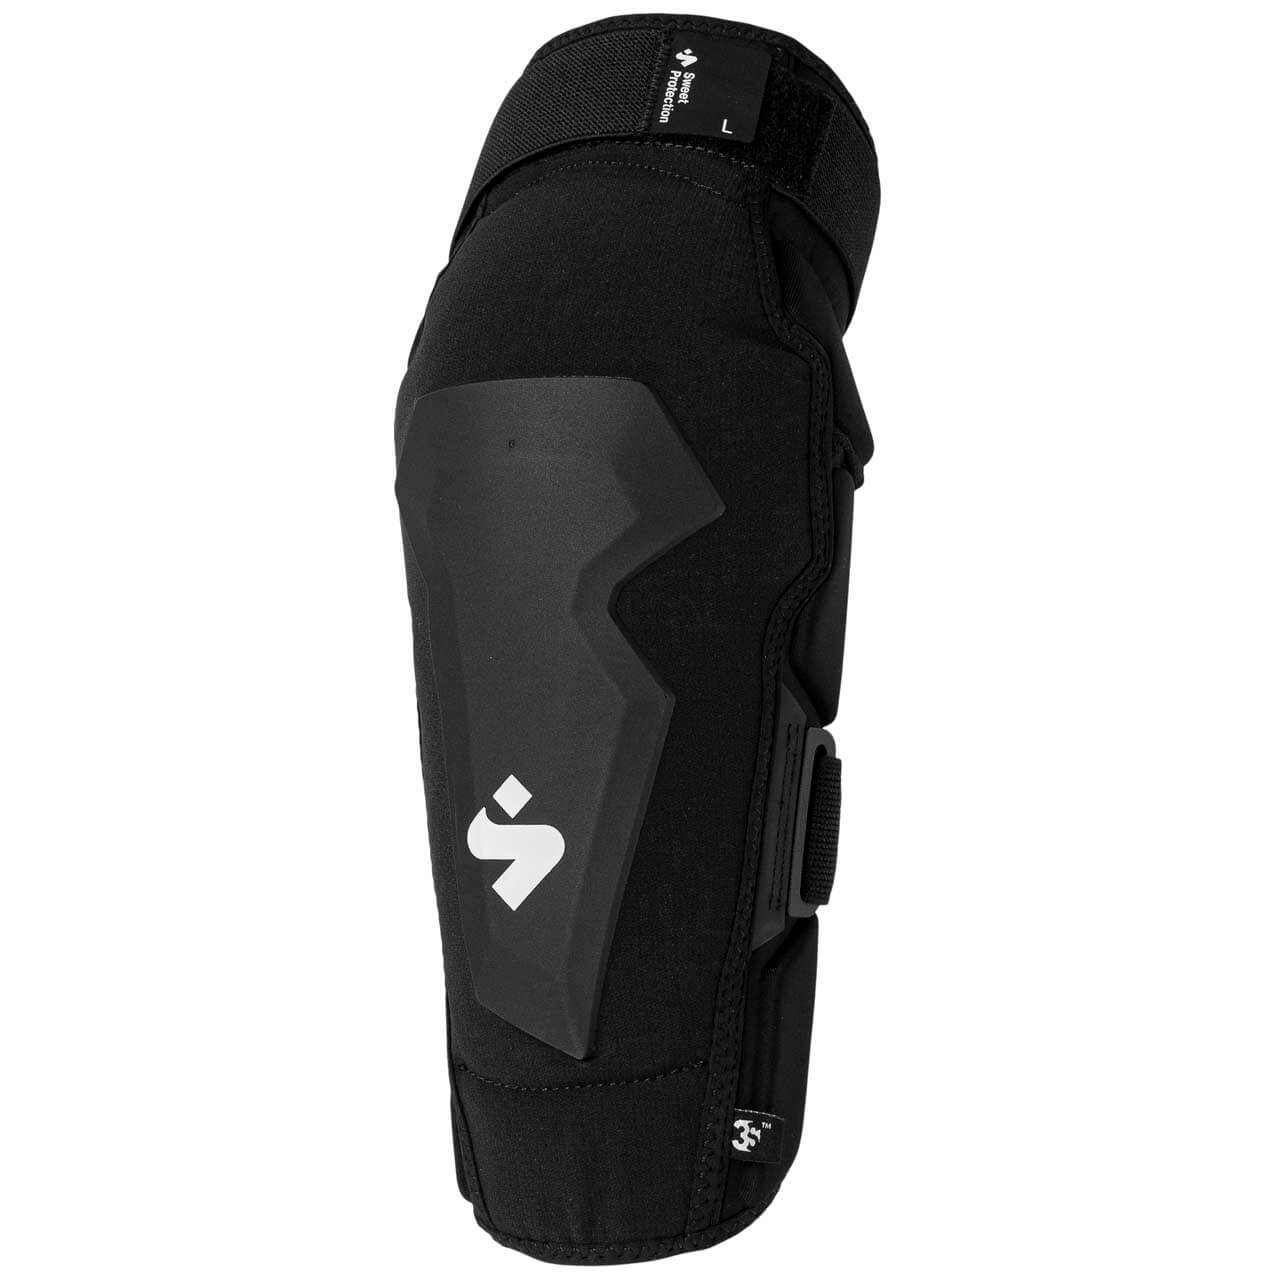 Sweet Protection Knee Guards Pro - Black, L